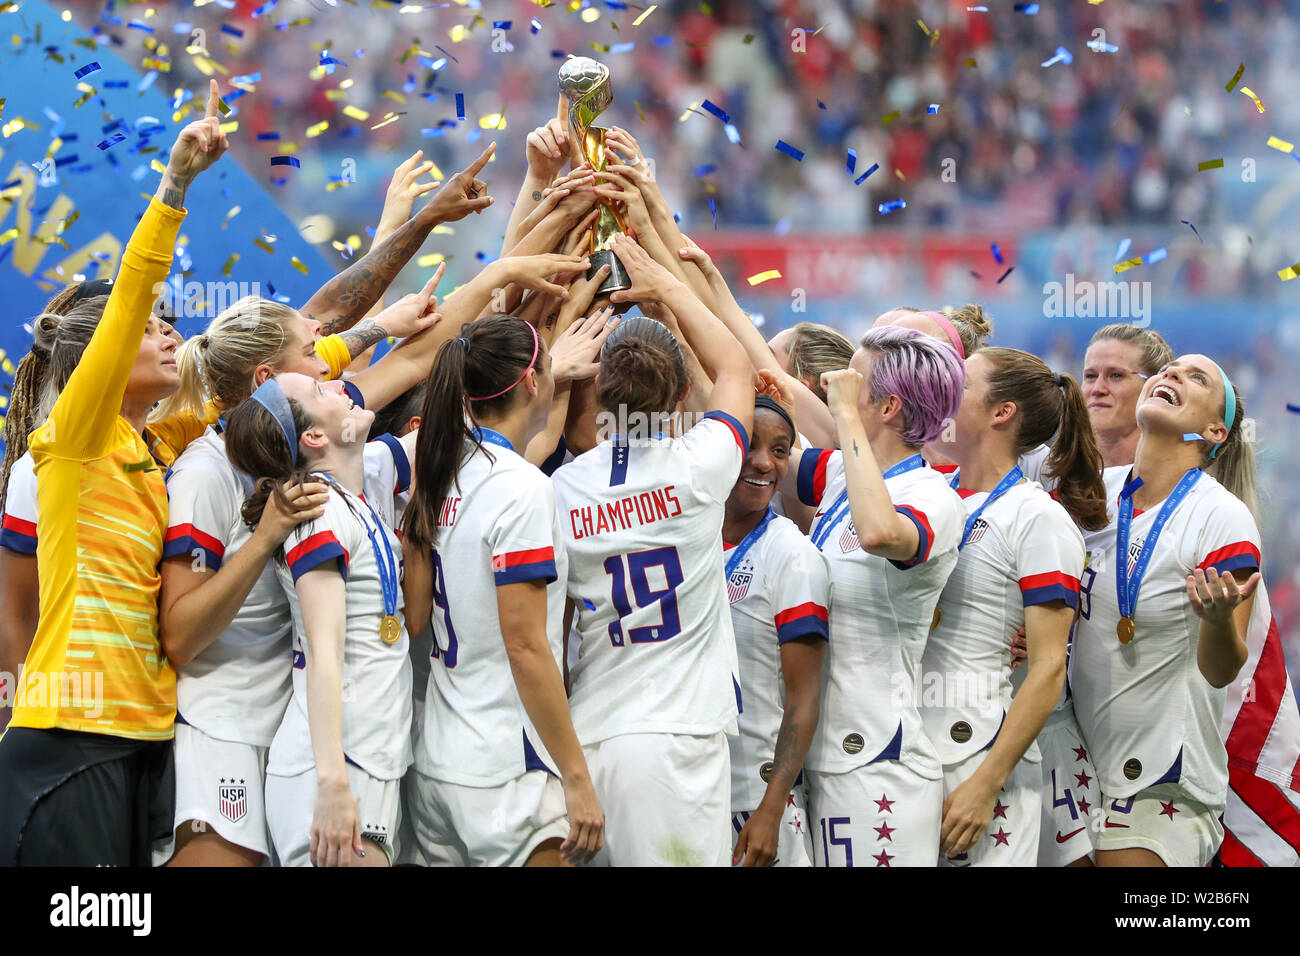 Lyon, France. 07th July, 2019. Players the United States during match against the Netherlands game valid for the Final of the Women 's Soccer World Cup in Lyon in France this Sunday, 07. Credit: Brazil Photo Press/Alamy Live News Stock Photo